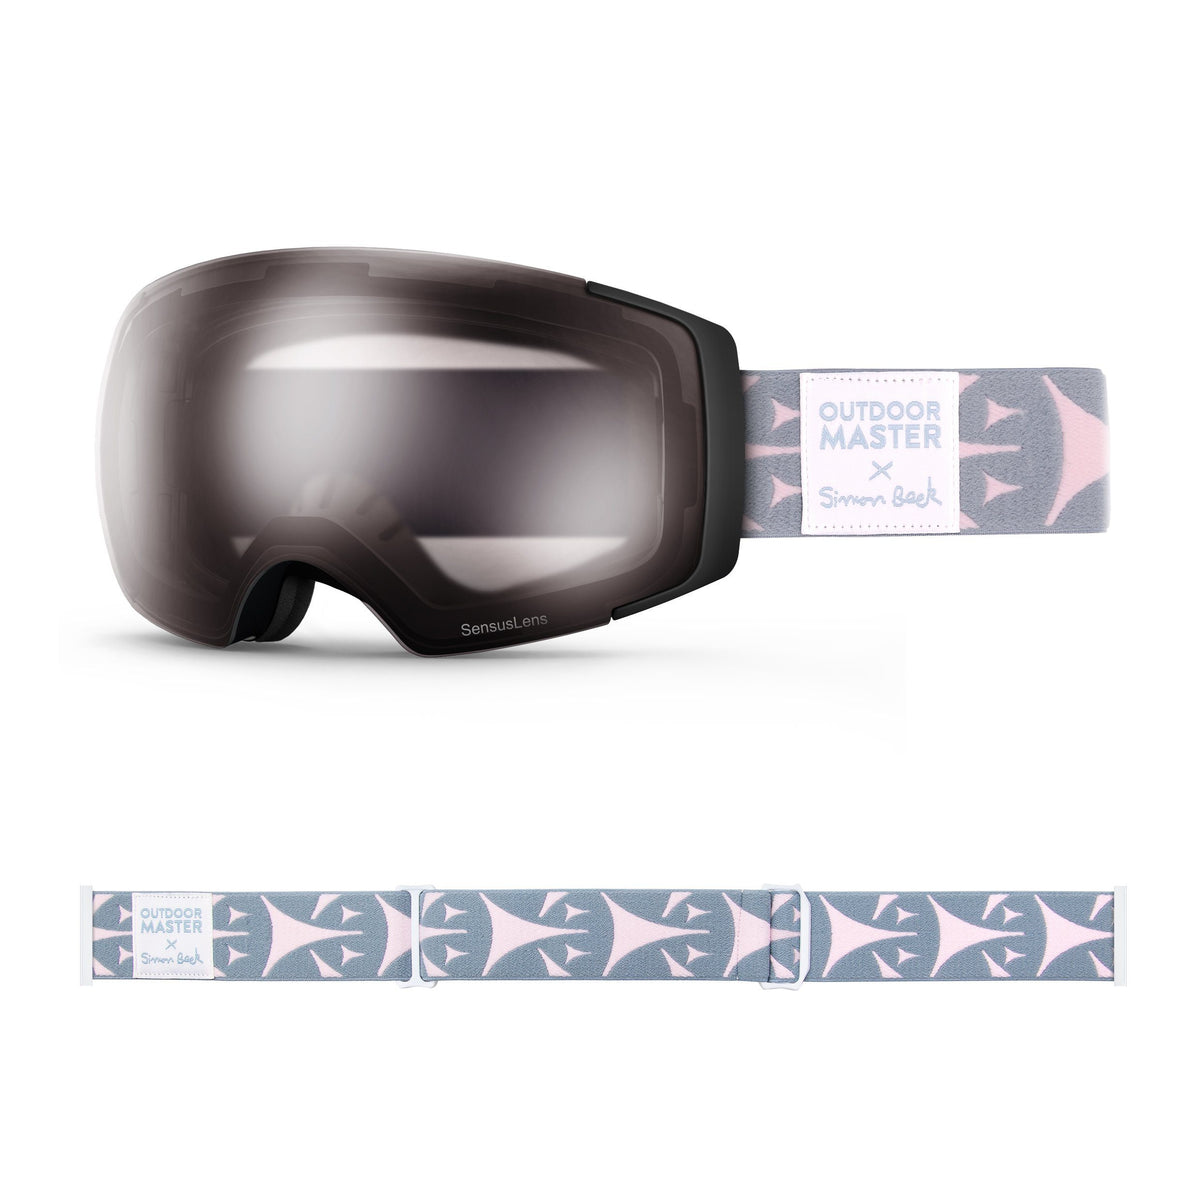 OutdoorMaster x Simon Beck Ski Goggles Pro Series - Snowshoeing Art Limited Edition OutdoorMaster SensusLens VLT40-80% Photochromatic Clear to Pink Bouncy Triangles